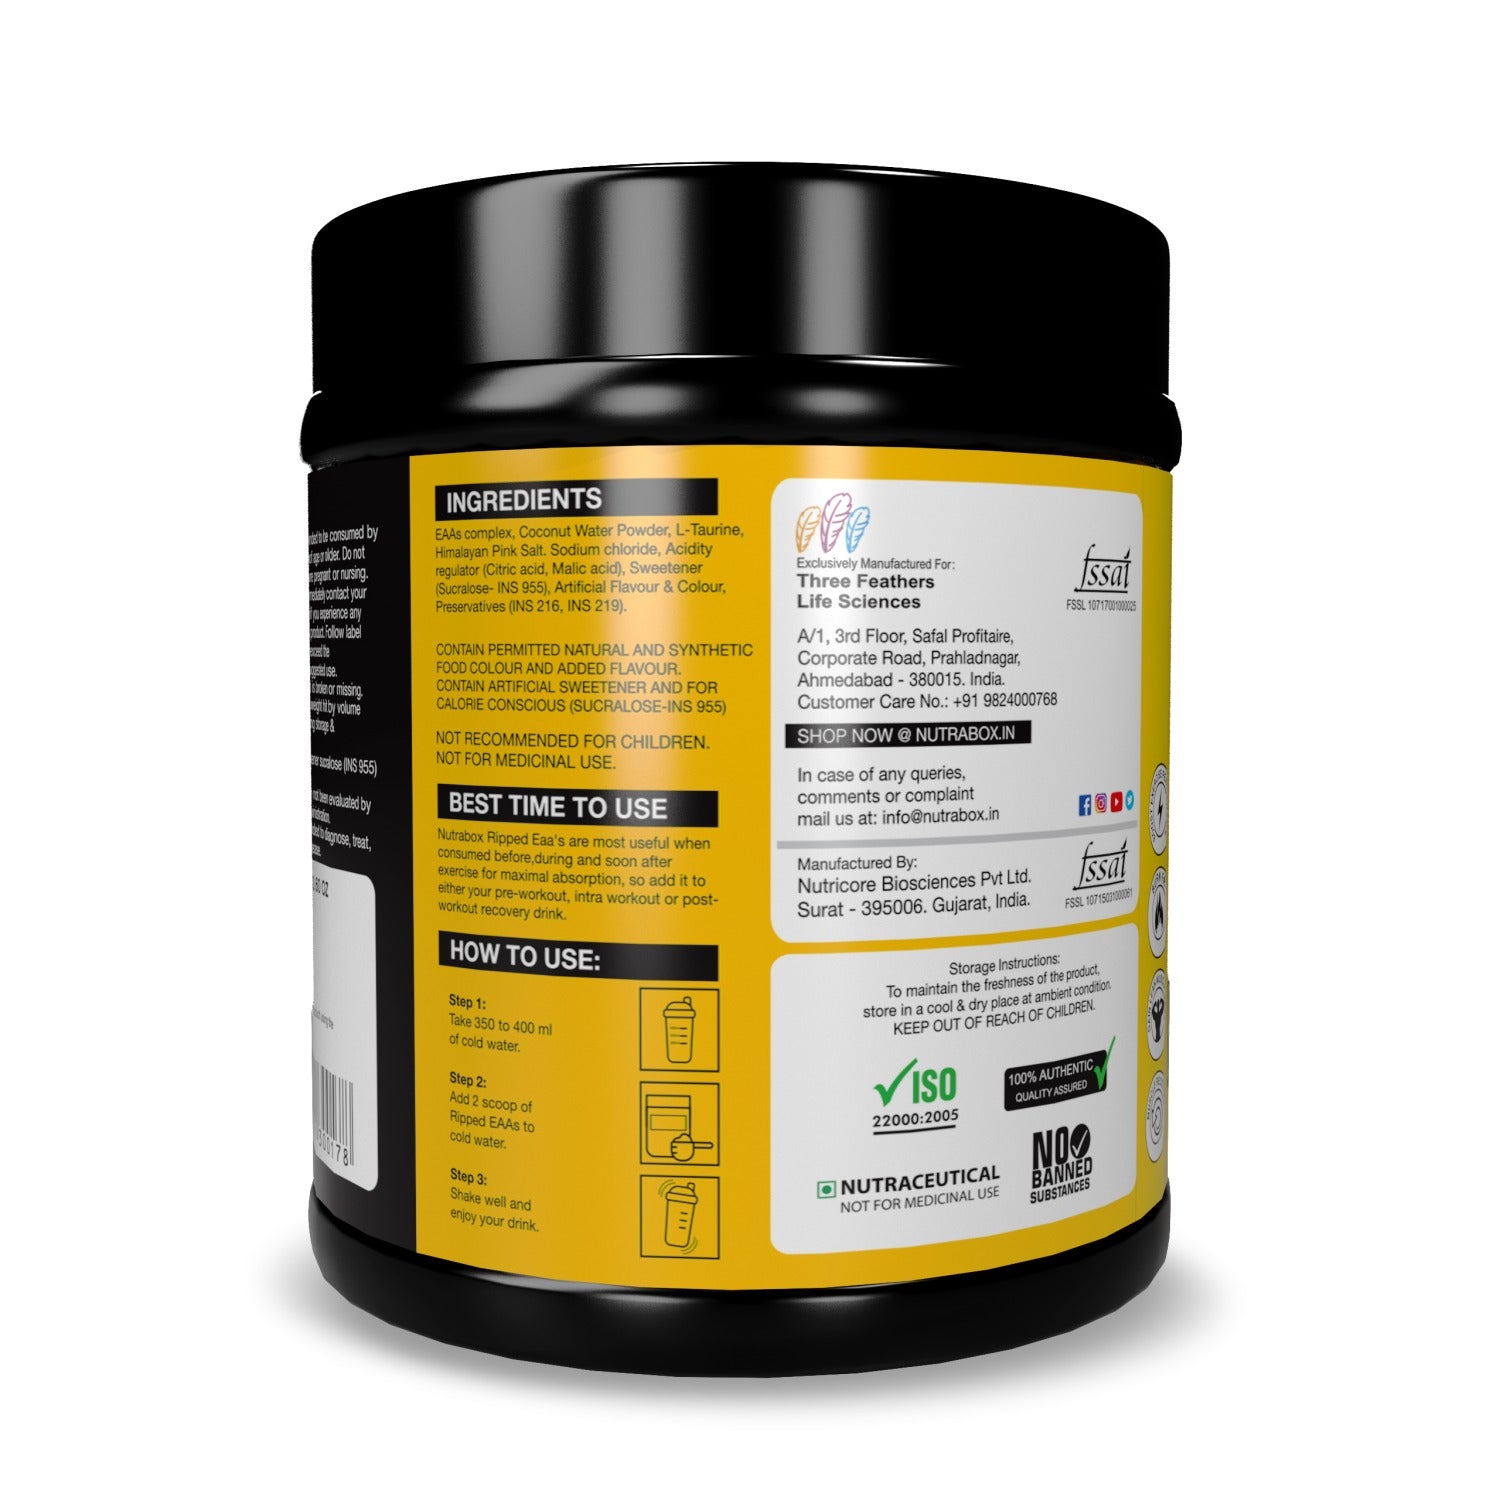 Ripped EAAs - Power of 9 essential Amino Acids - Nutrabox India